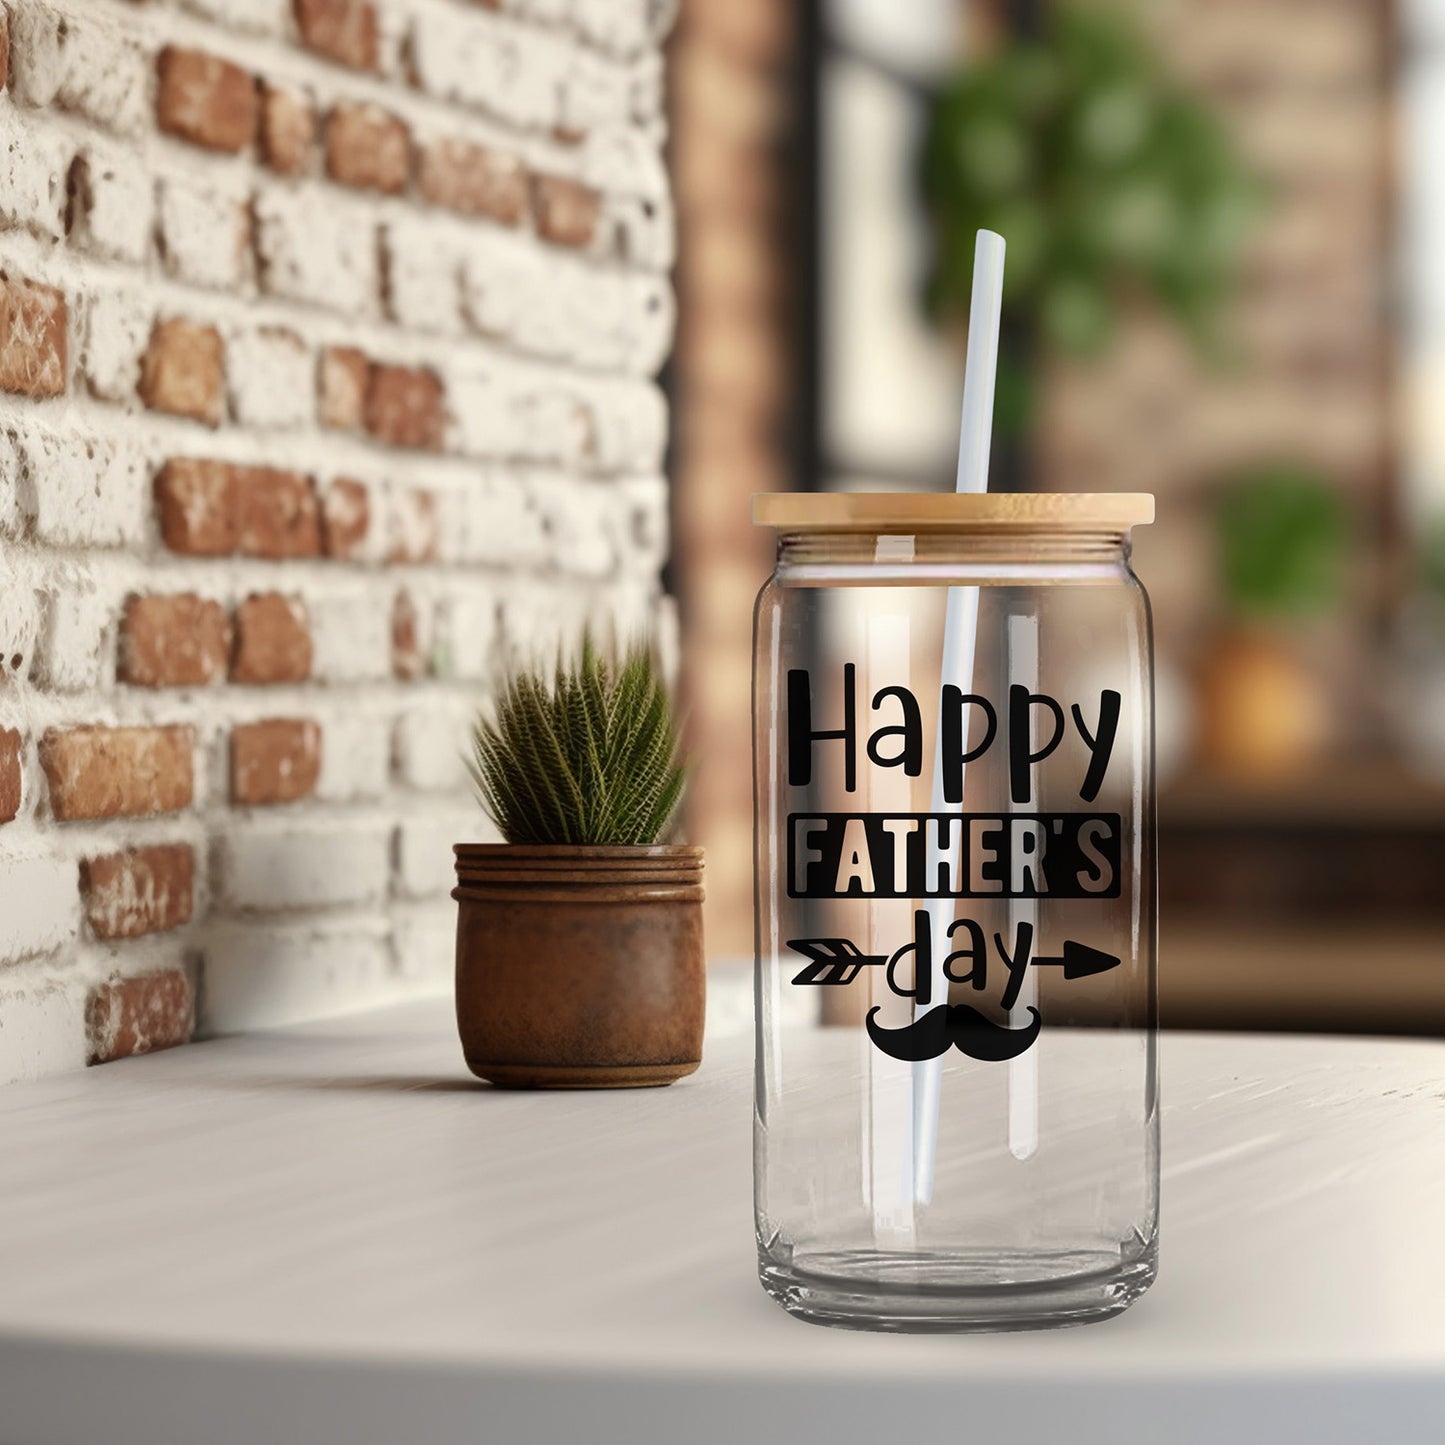 "Happy Father's Day" Graphic